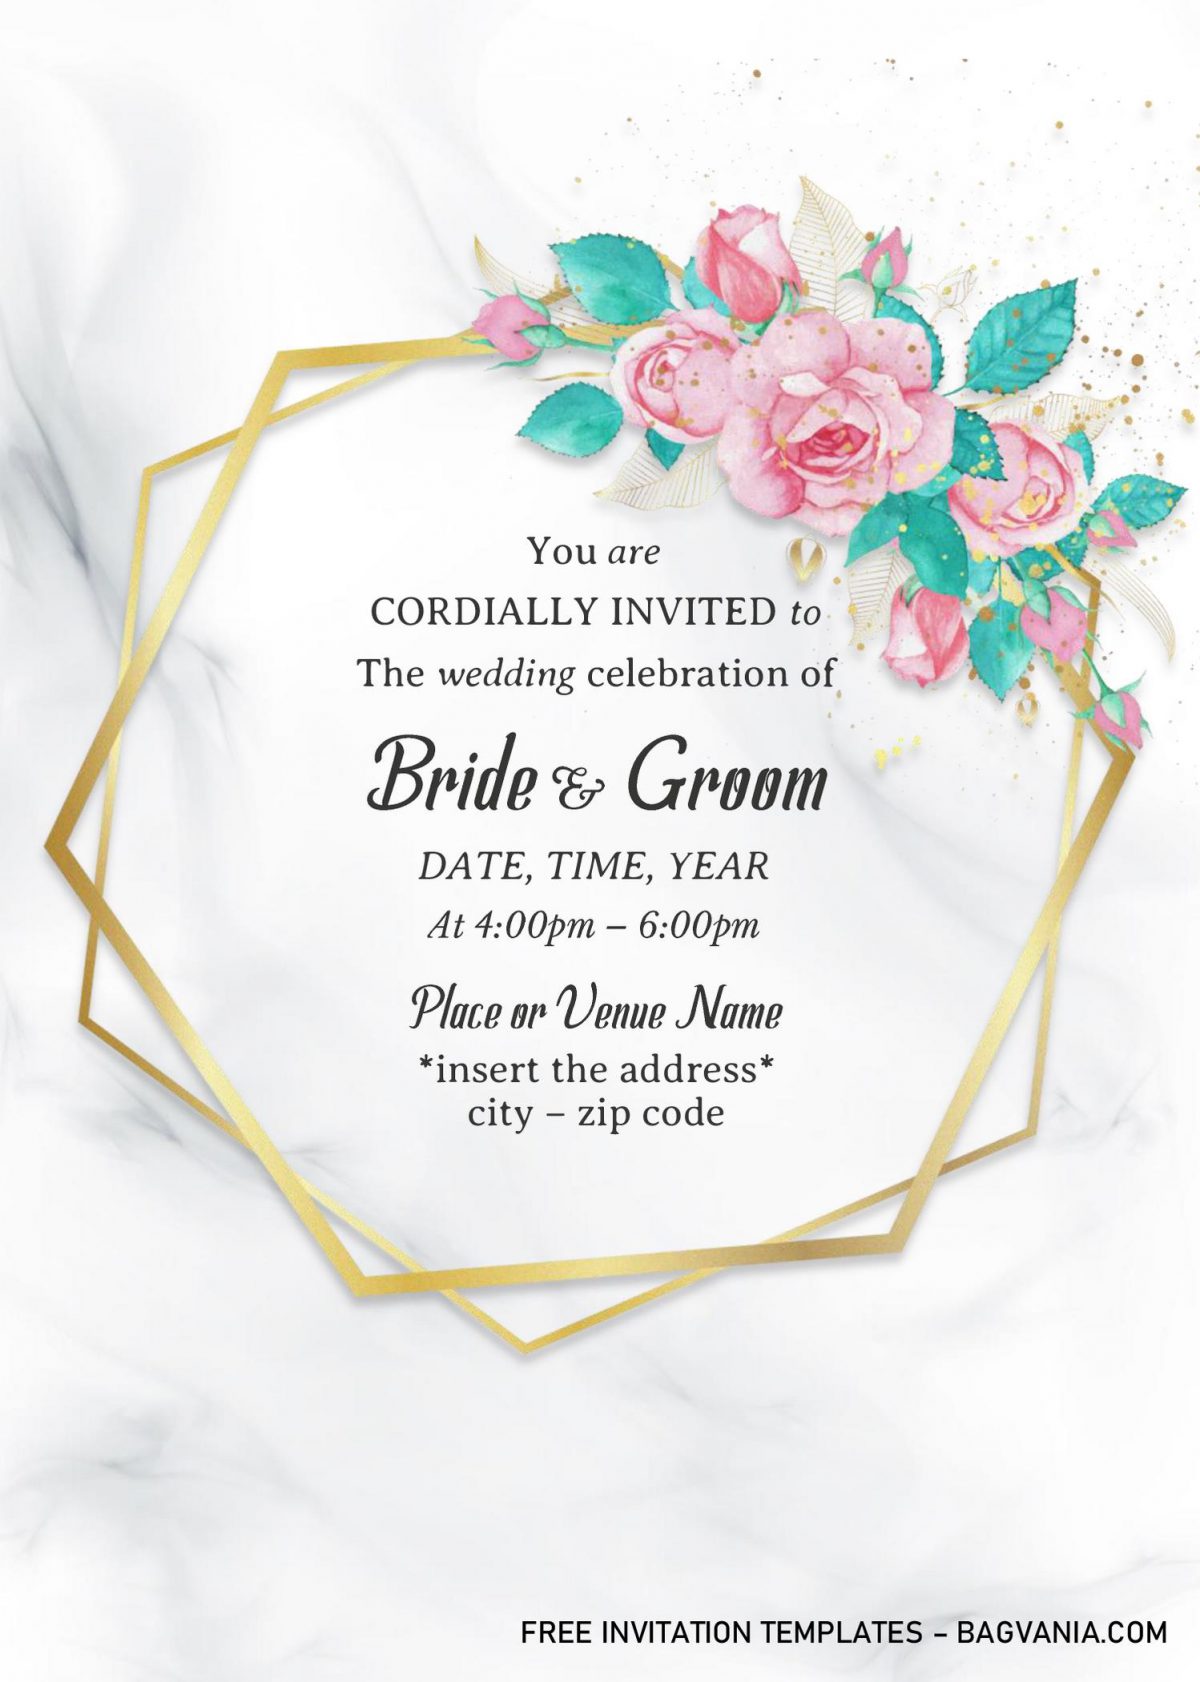 Gold Frame Floral Wedding Invitation Templates - Editable With MS Word and has geometric pattern